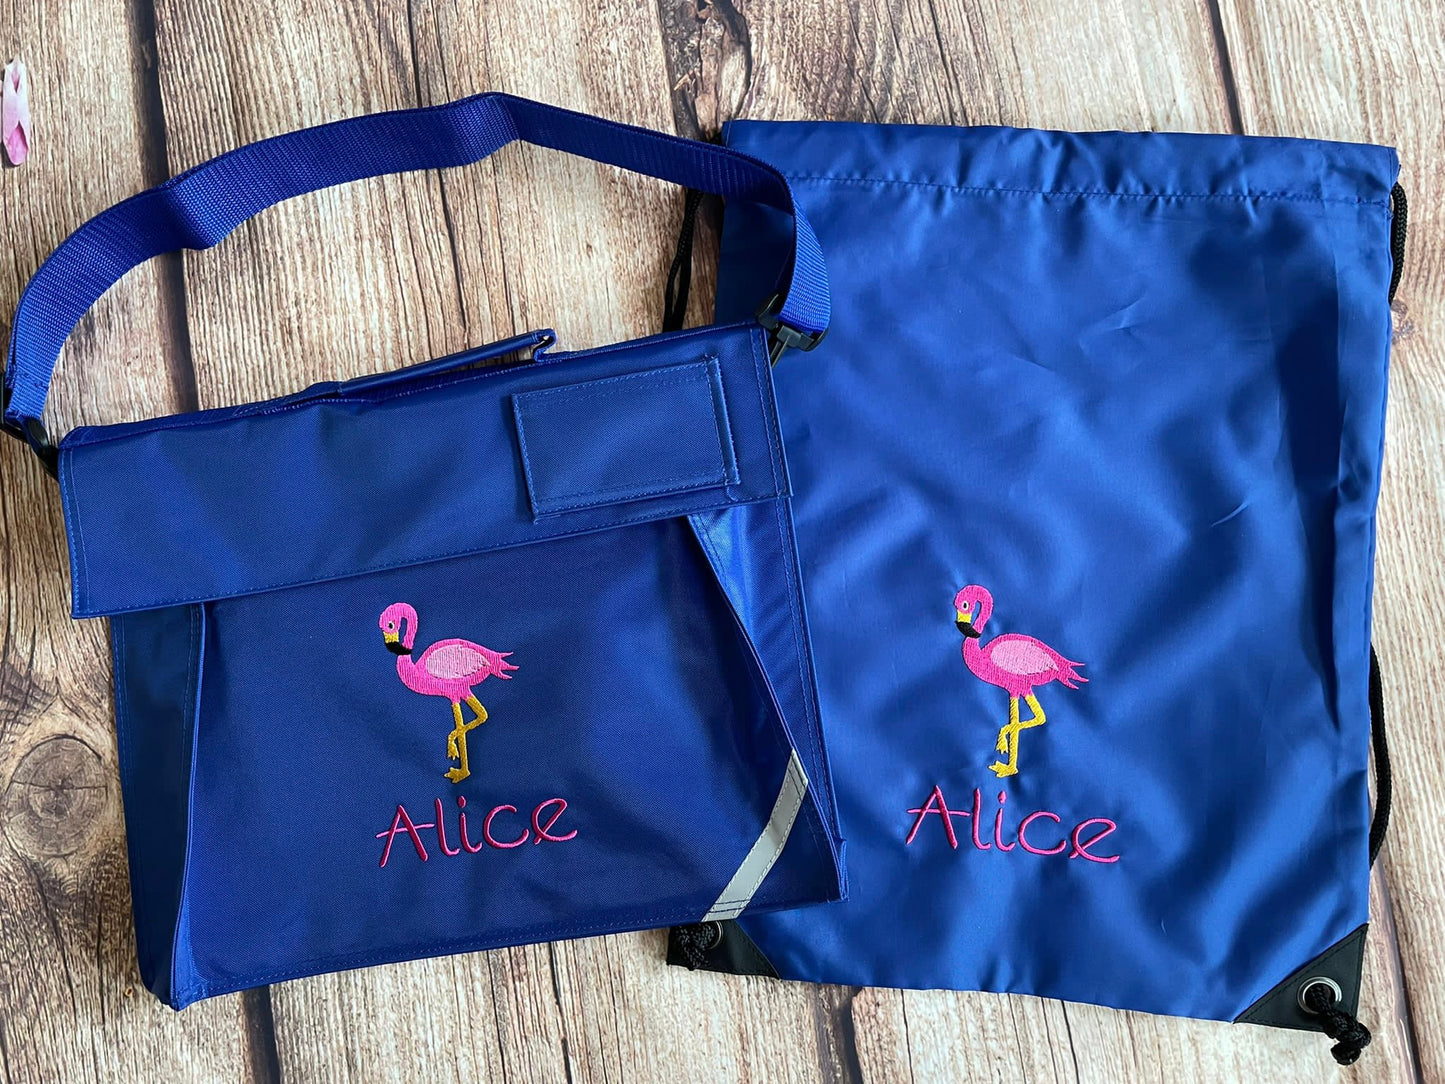 Set - matching book bag and pe bag for school. Personalised with name and motif.